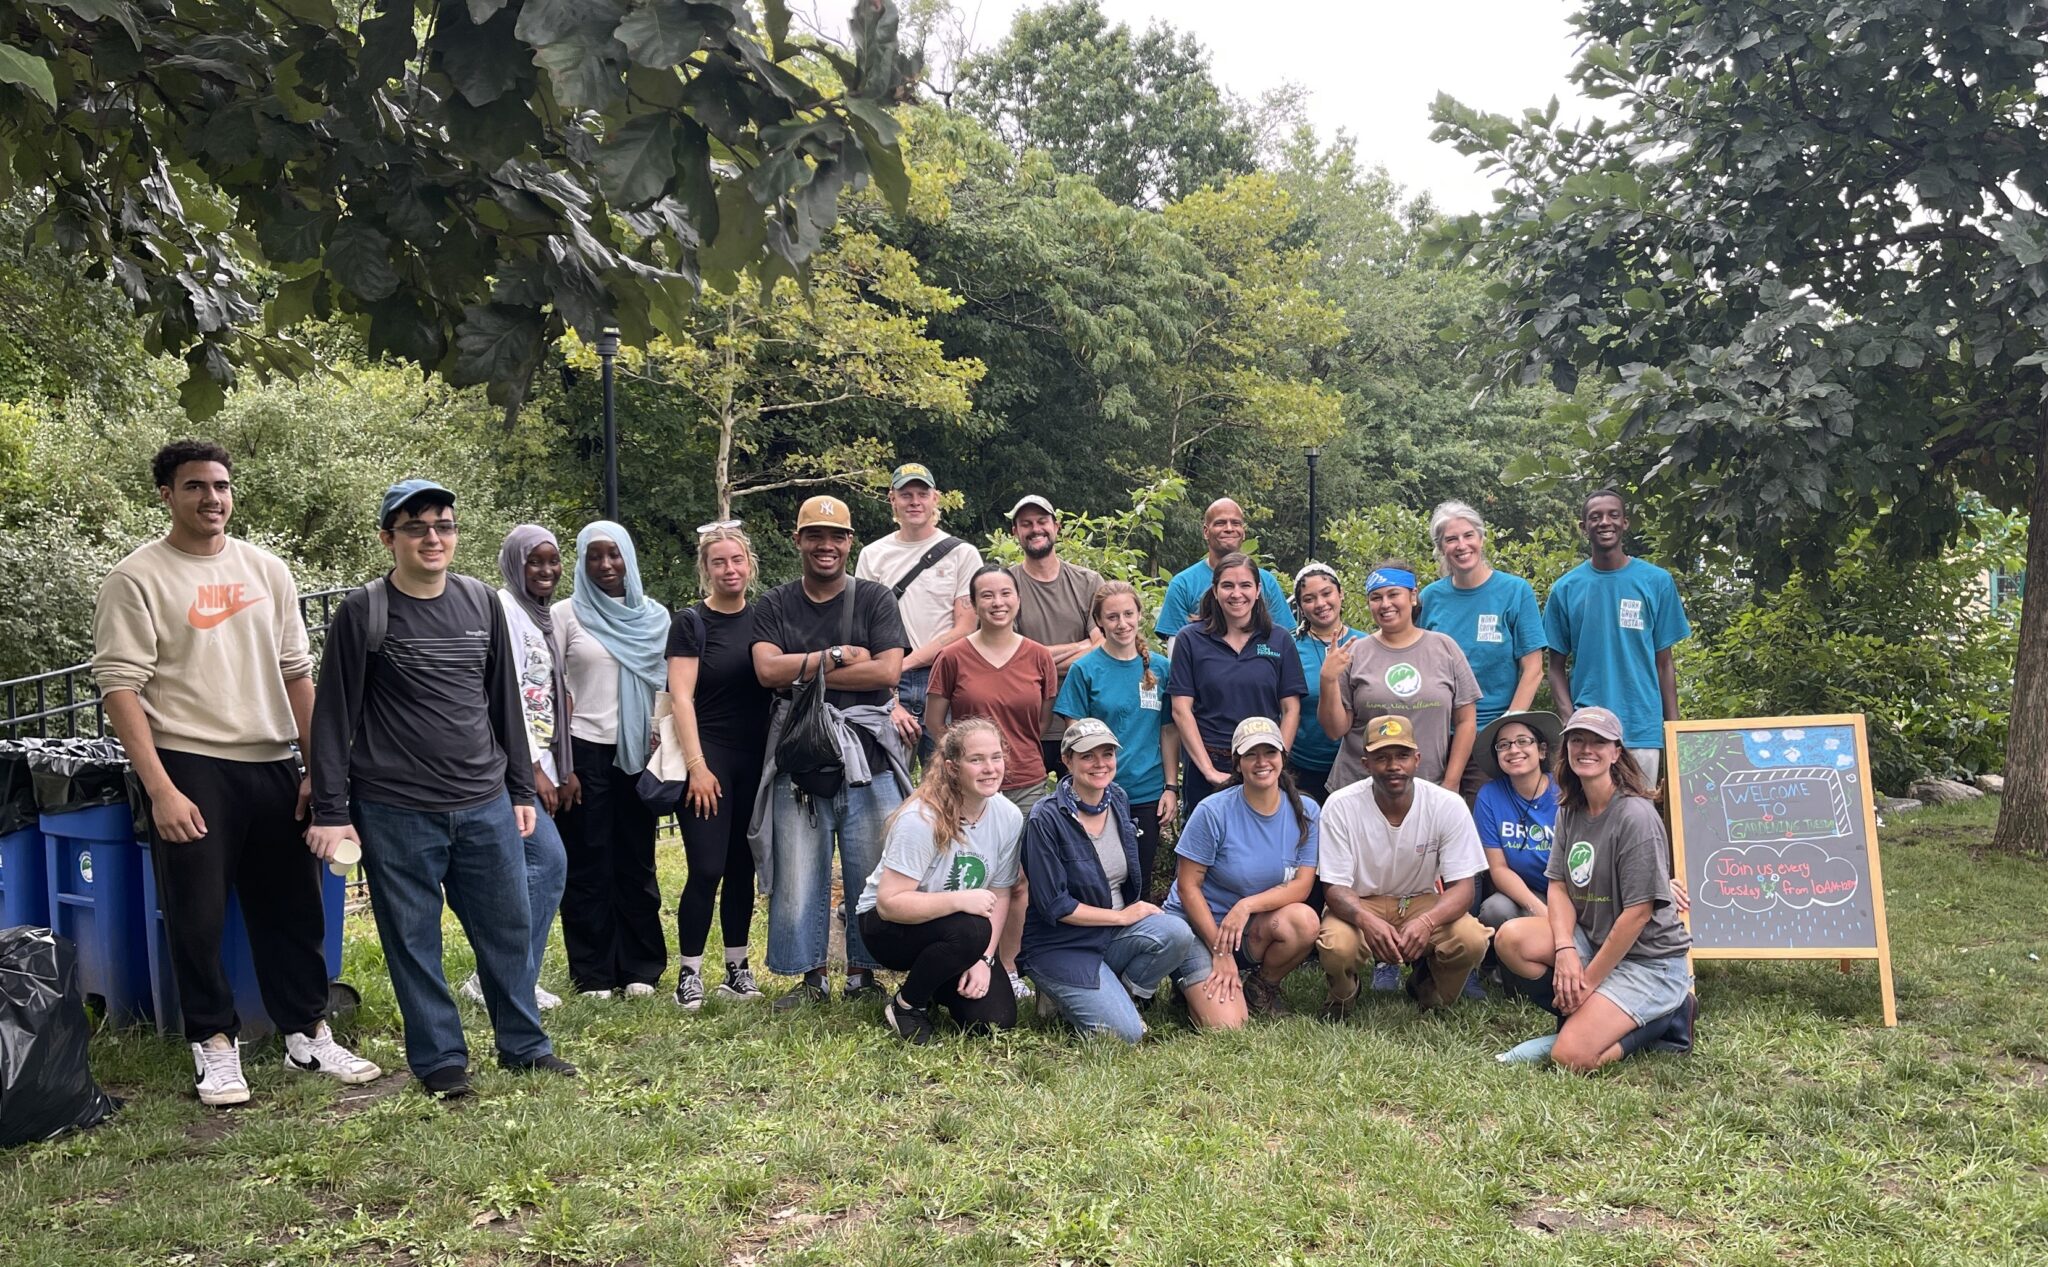 Bronx Watershed Work Day hosted by RAIN Coalition members, Bronx River Alliance, and the Hope Program